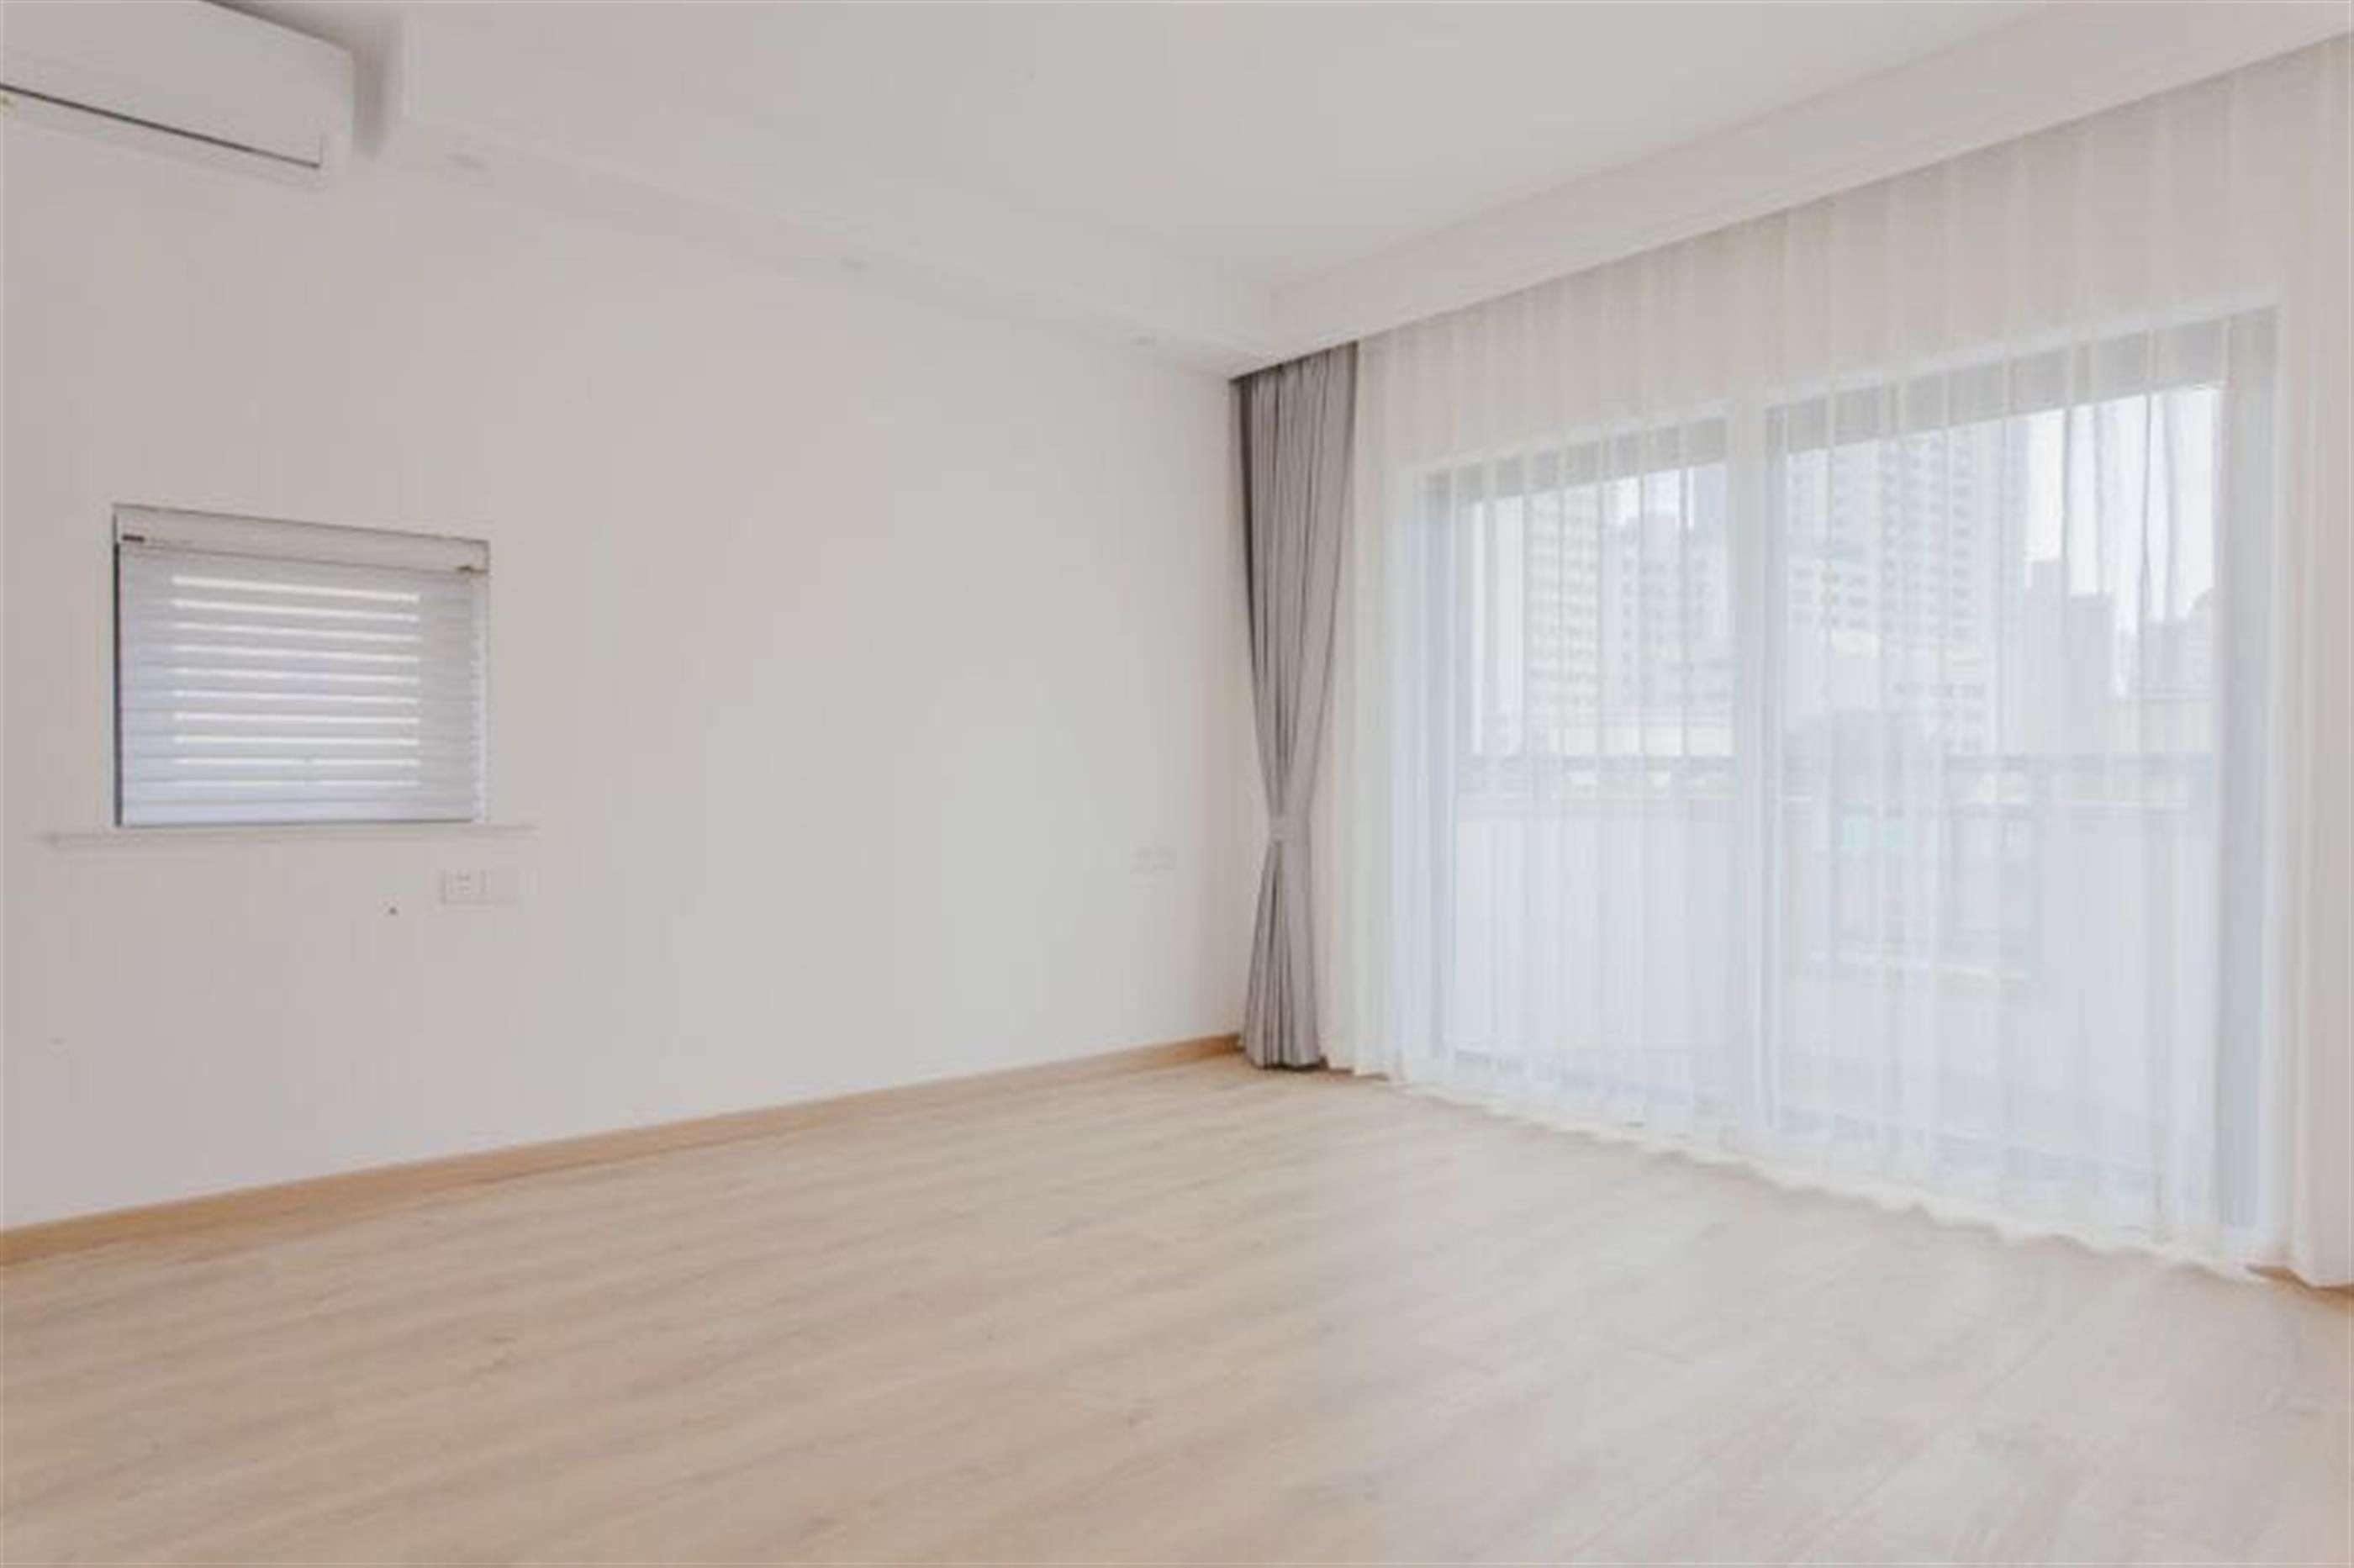 sunny rooms Newly Renovated Spacious 3BR Apt Nr Parks & Ln 2/11 for Rent in Shanghai